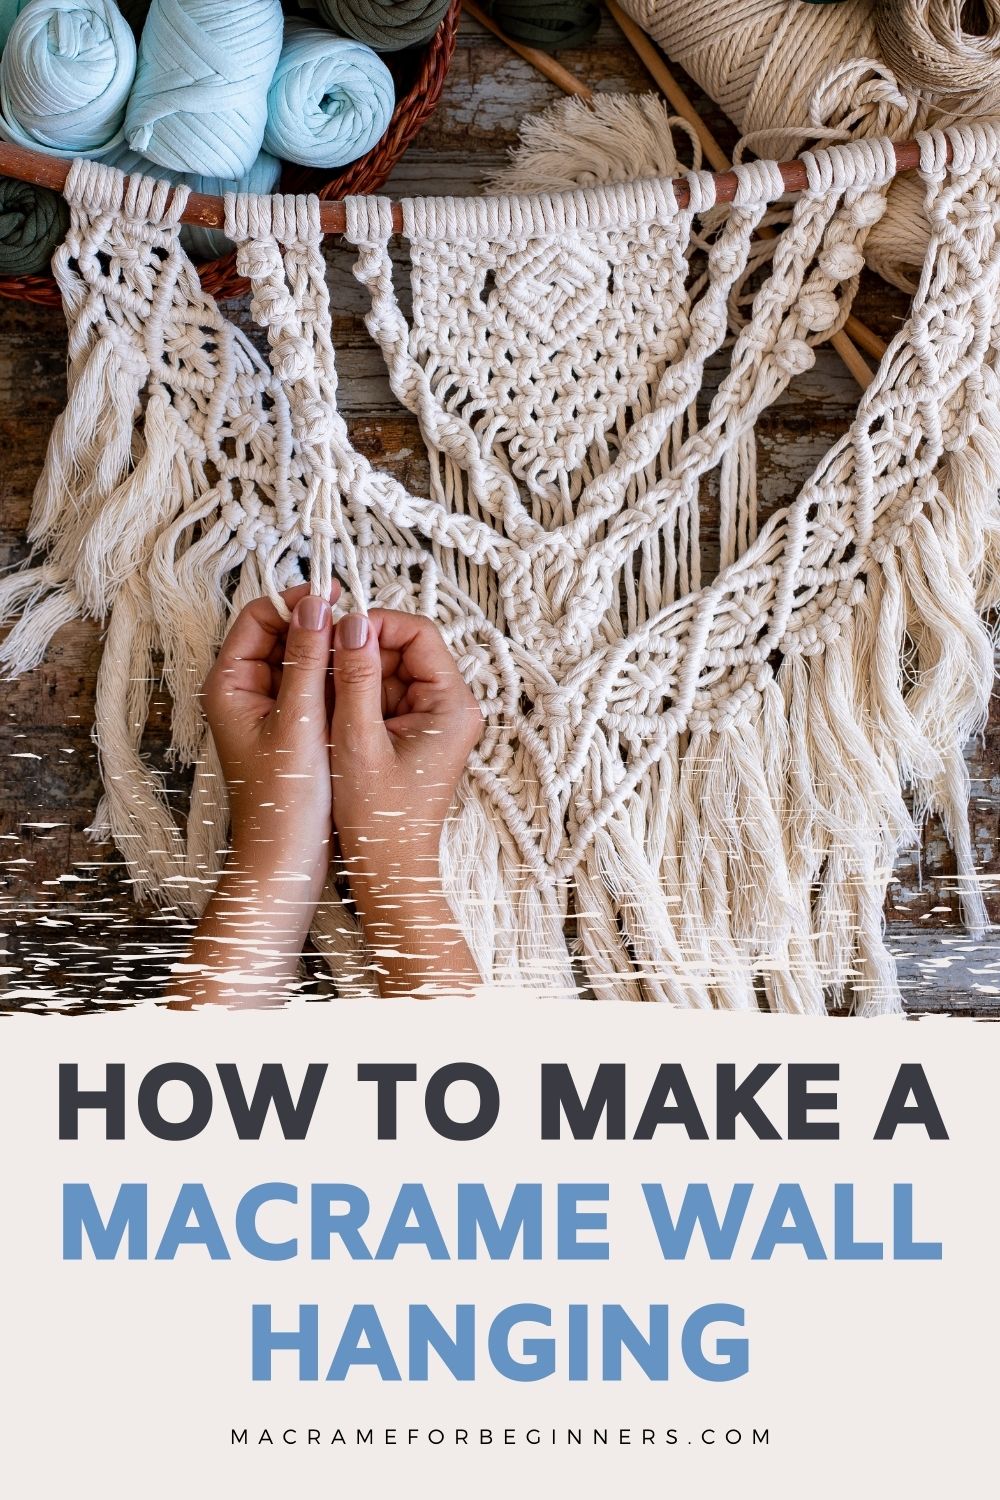 How to Make a Macrame Wall Hanging – Best Tips for Beginners